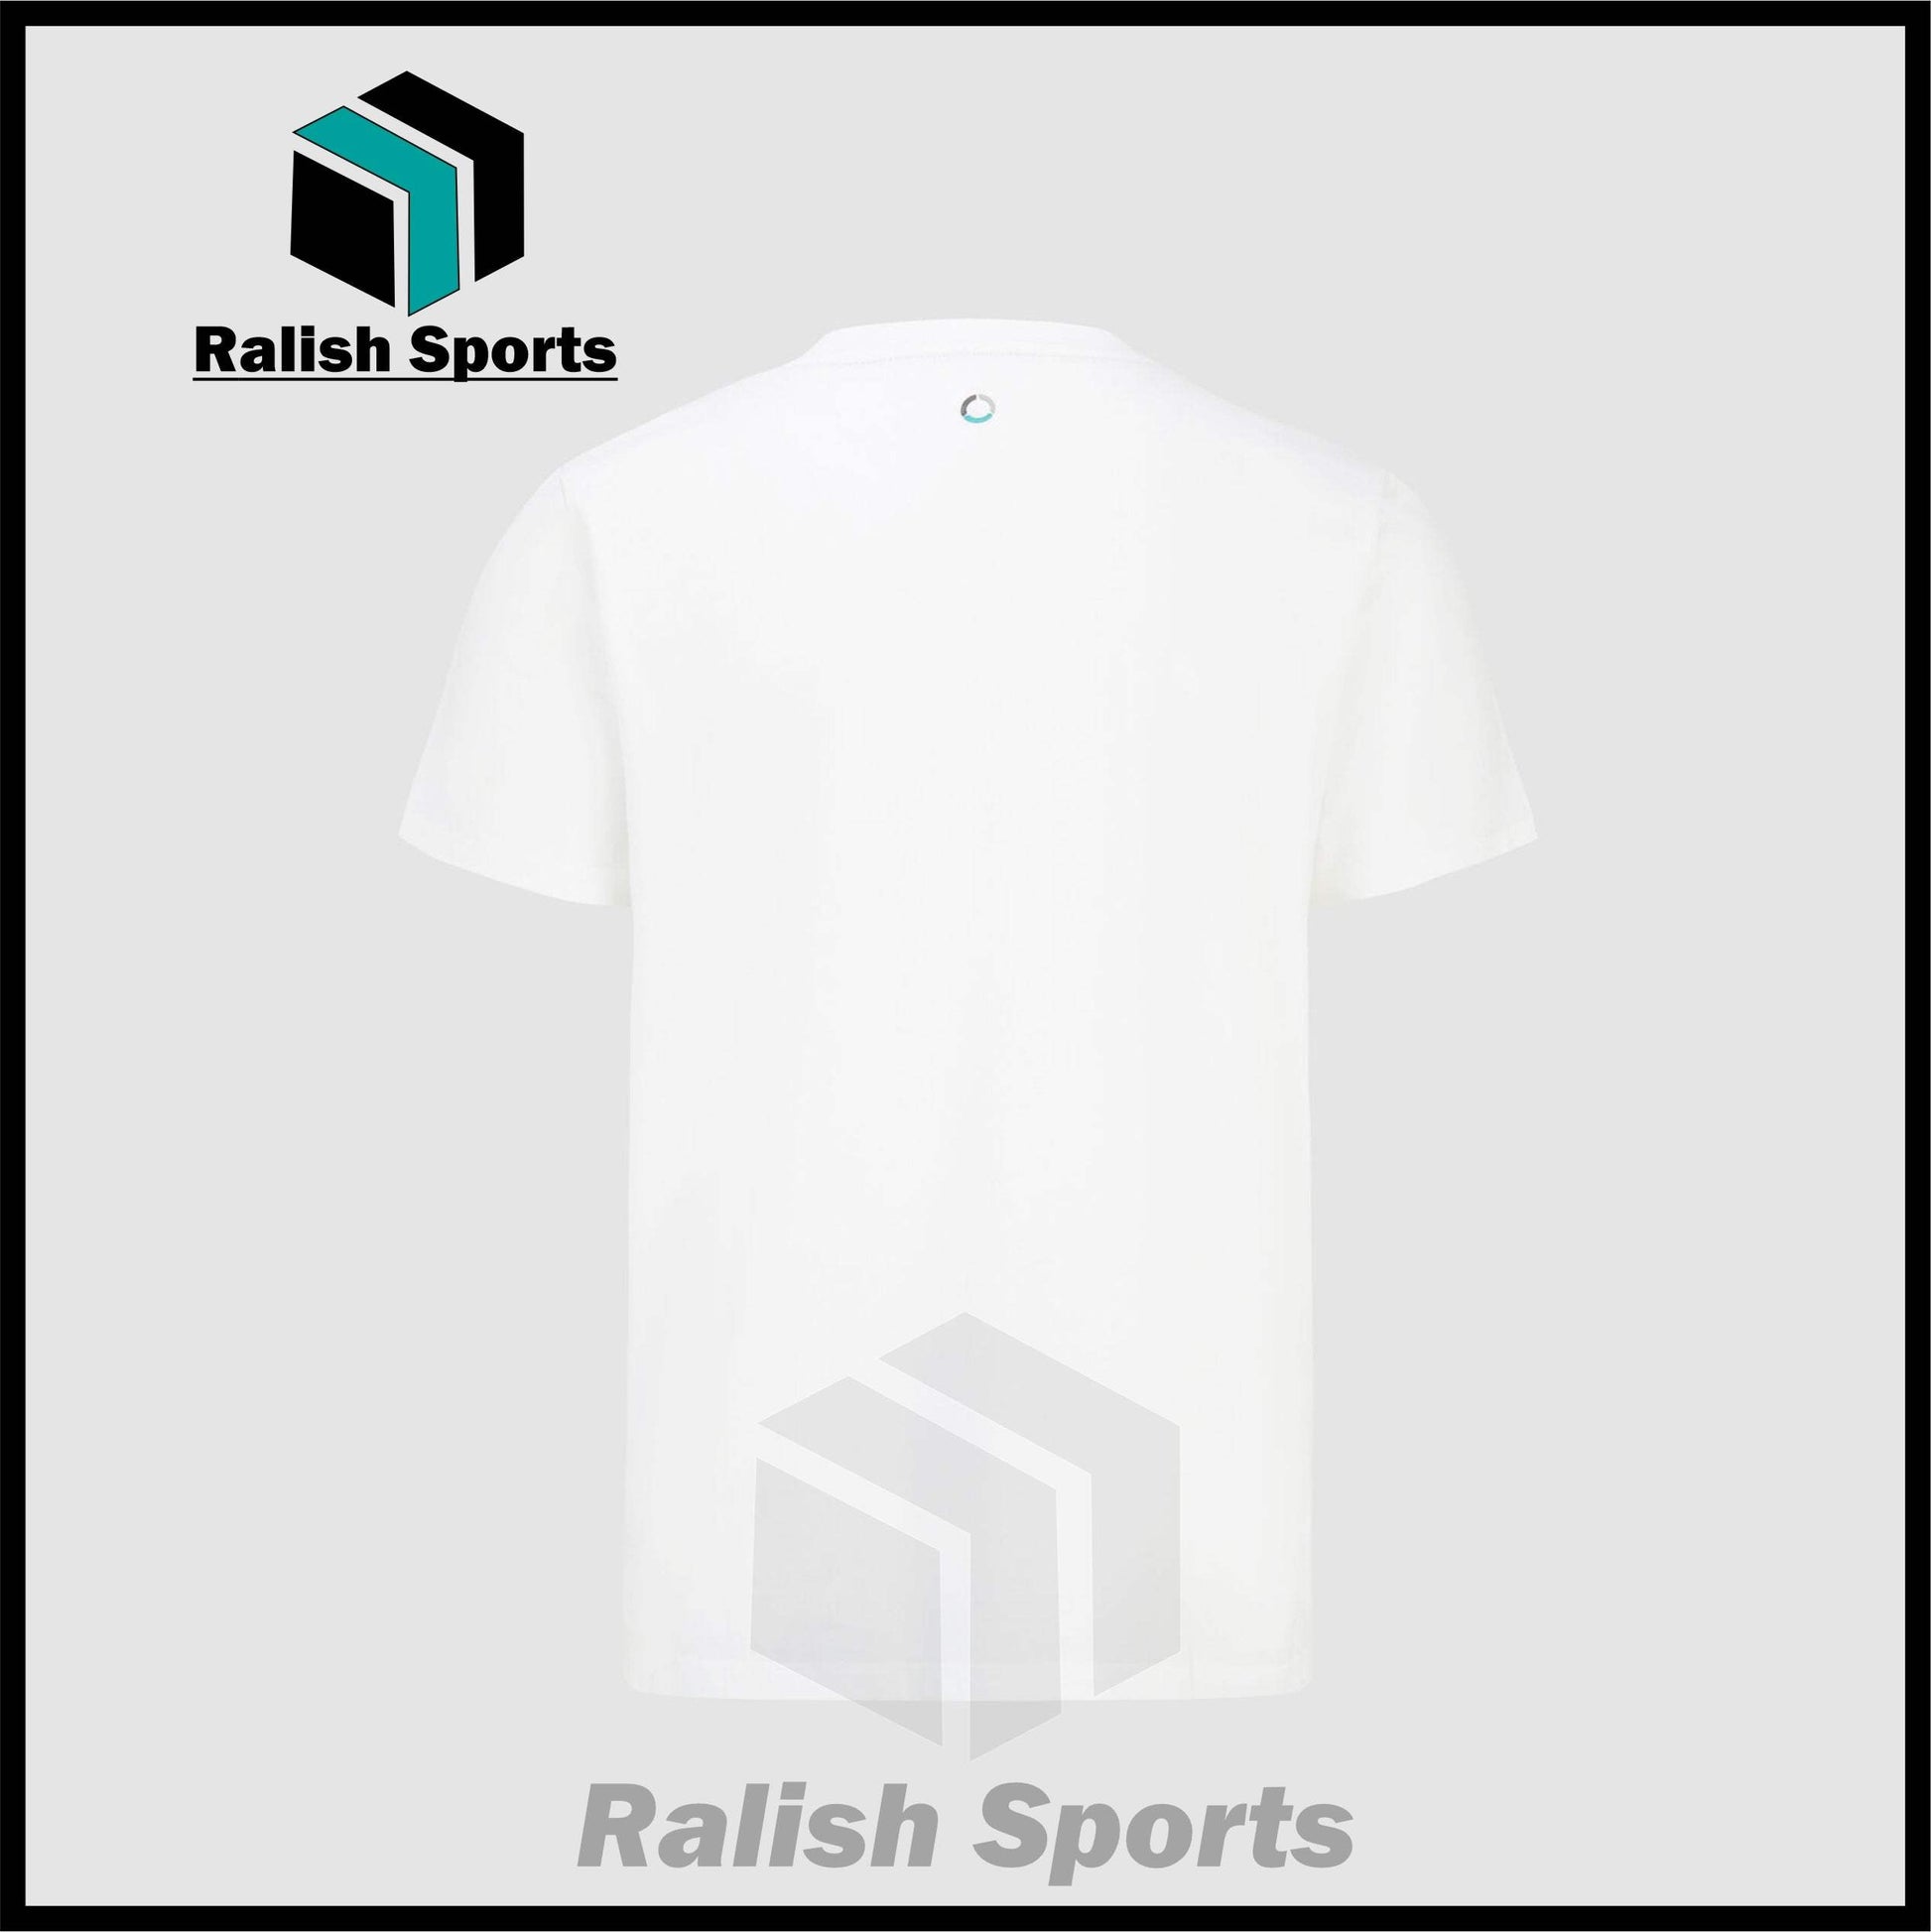 Mercedes-AMG F1 Fierce and Fearless Graphic T-shirt - Ralish Sports